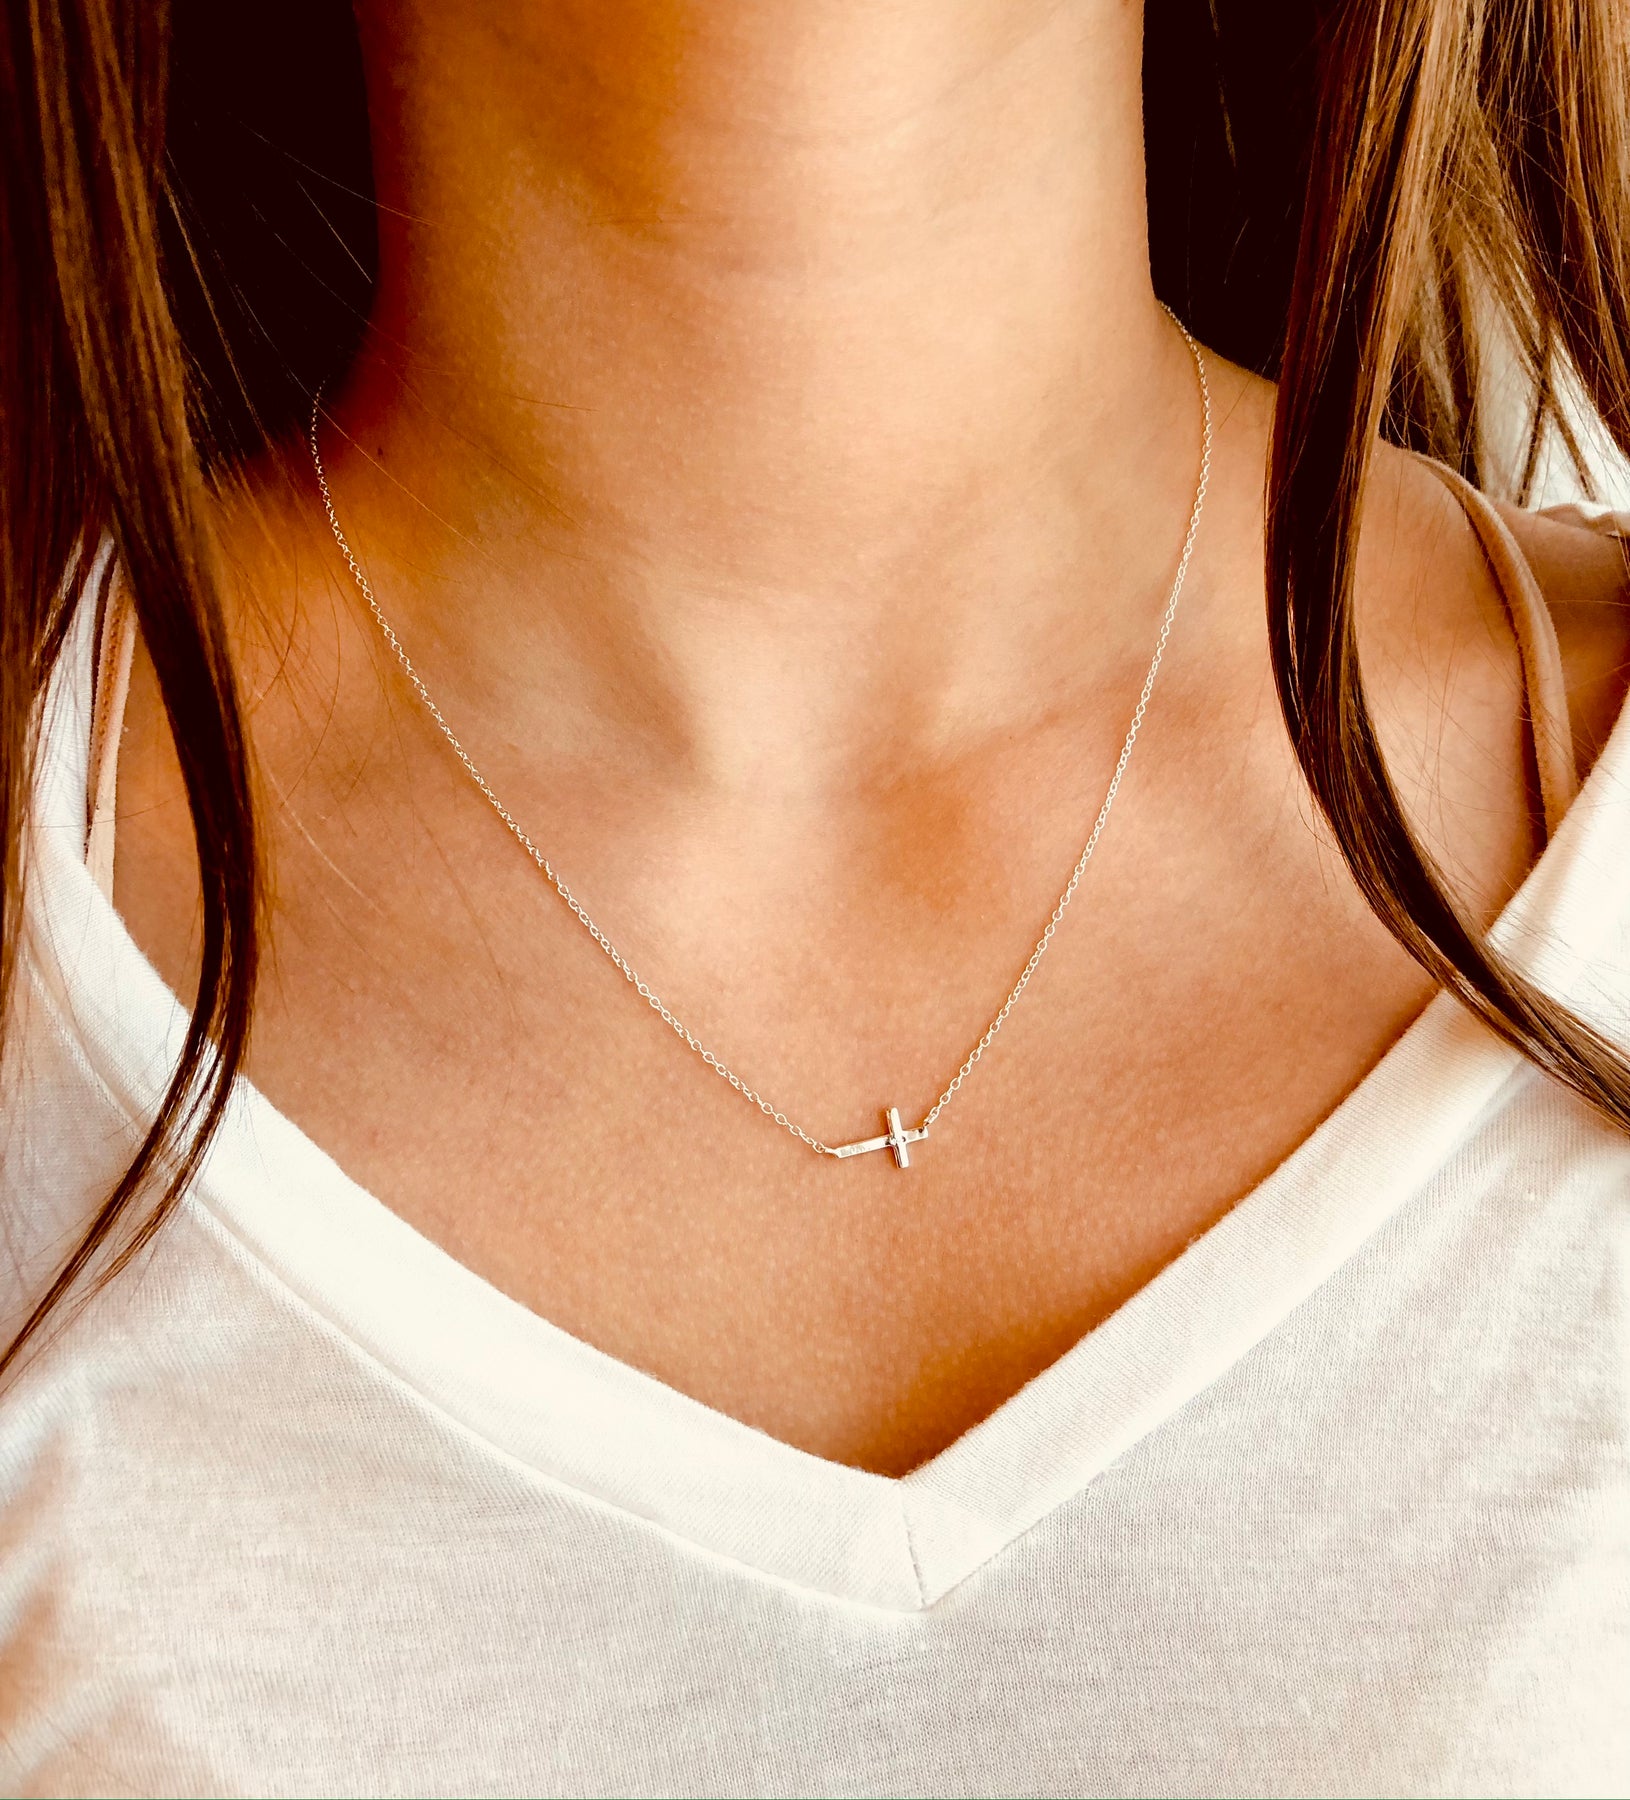 Buy Valloey Rover Valloey Cross Pendant Chain Necklace,14K Gold Plated  Dainty Cute Lucky Cross Triangle Tiny Pendant Necklaces for Women Men Girls  Jewelry Gifts at Amazon.in